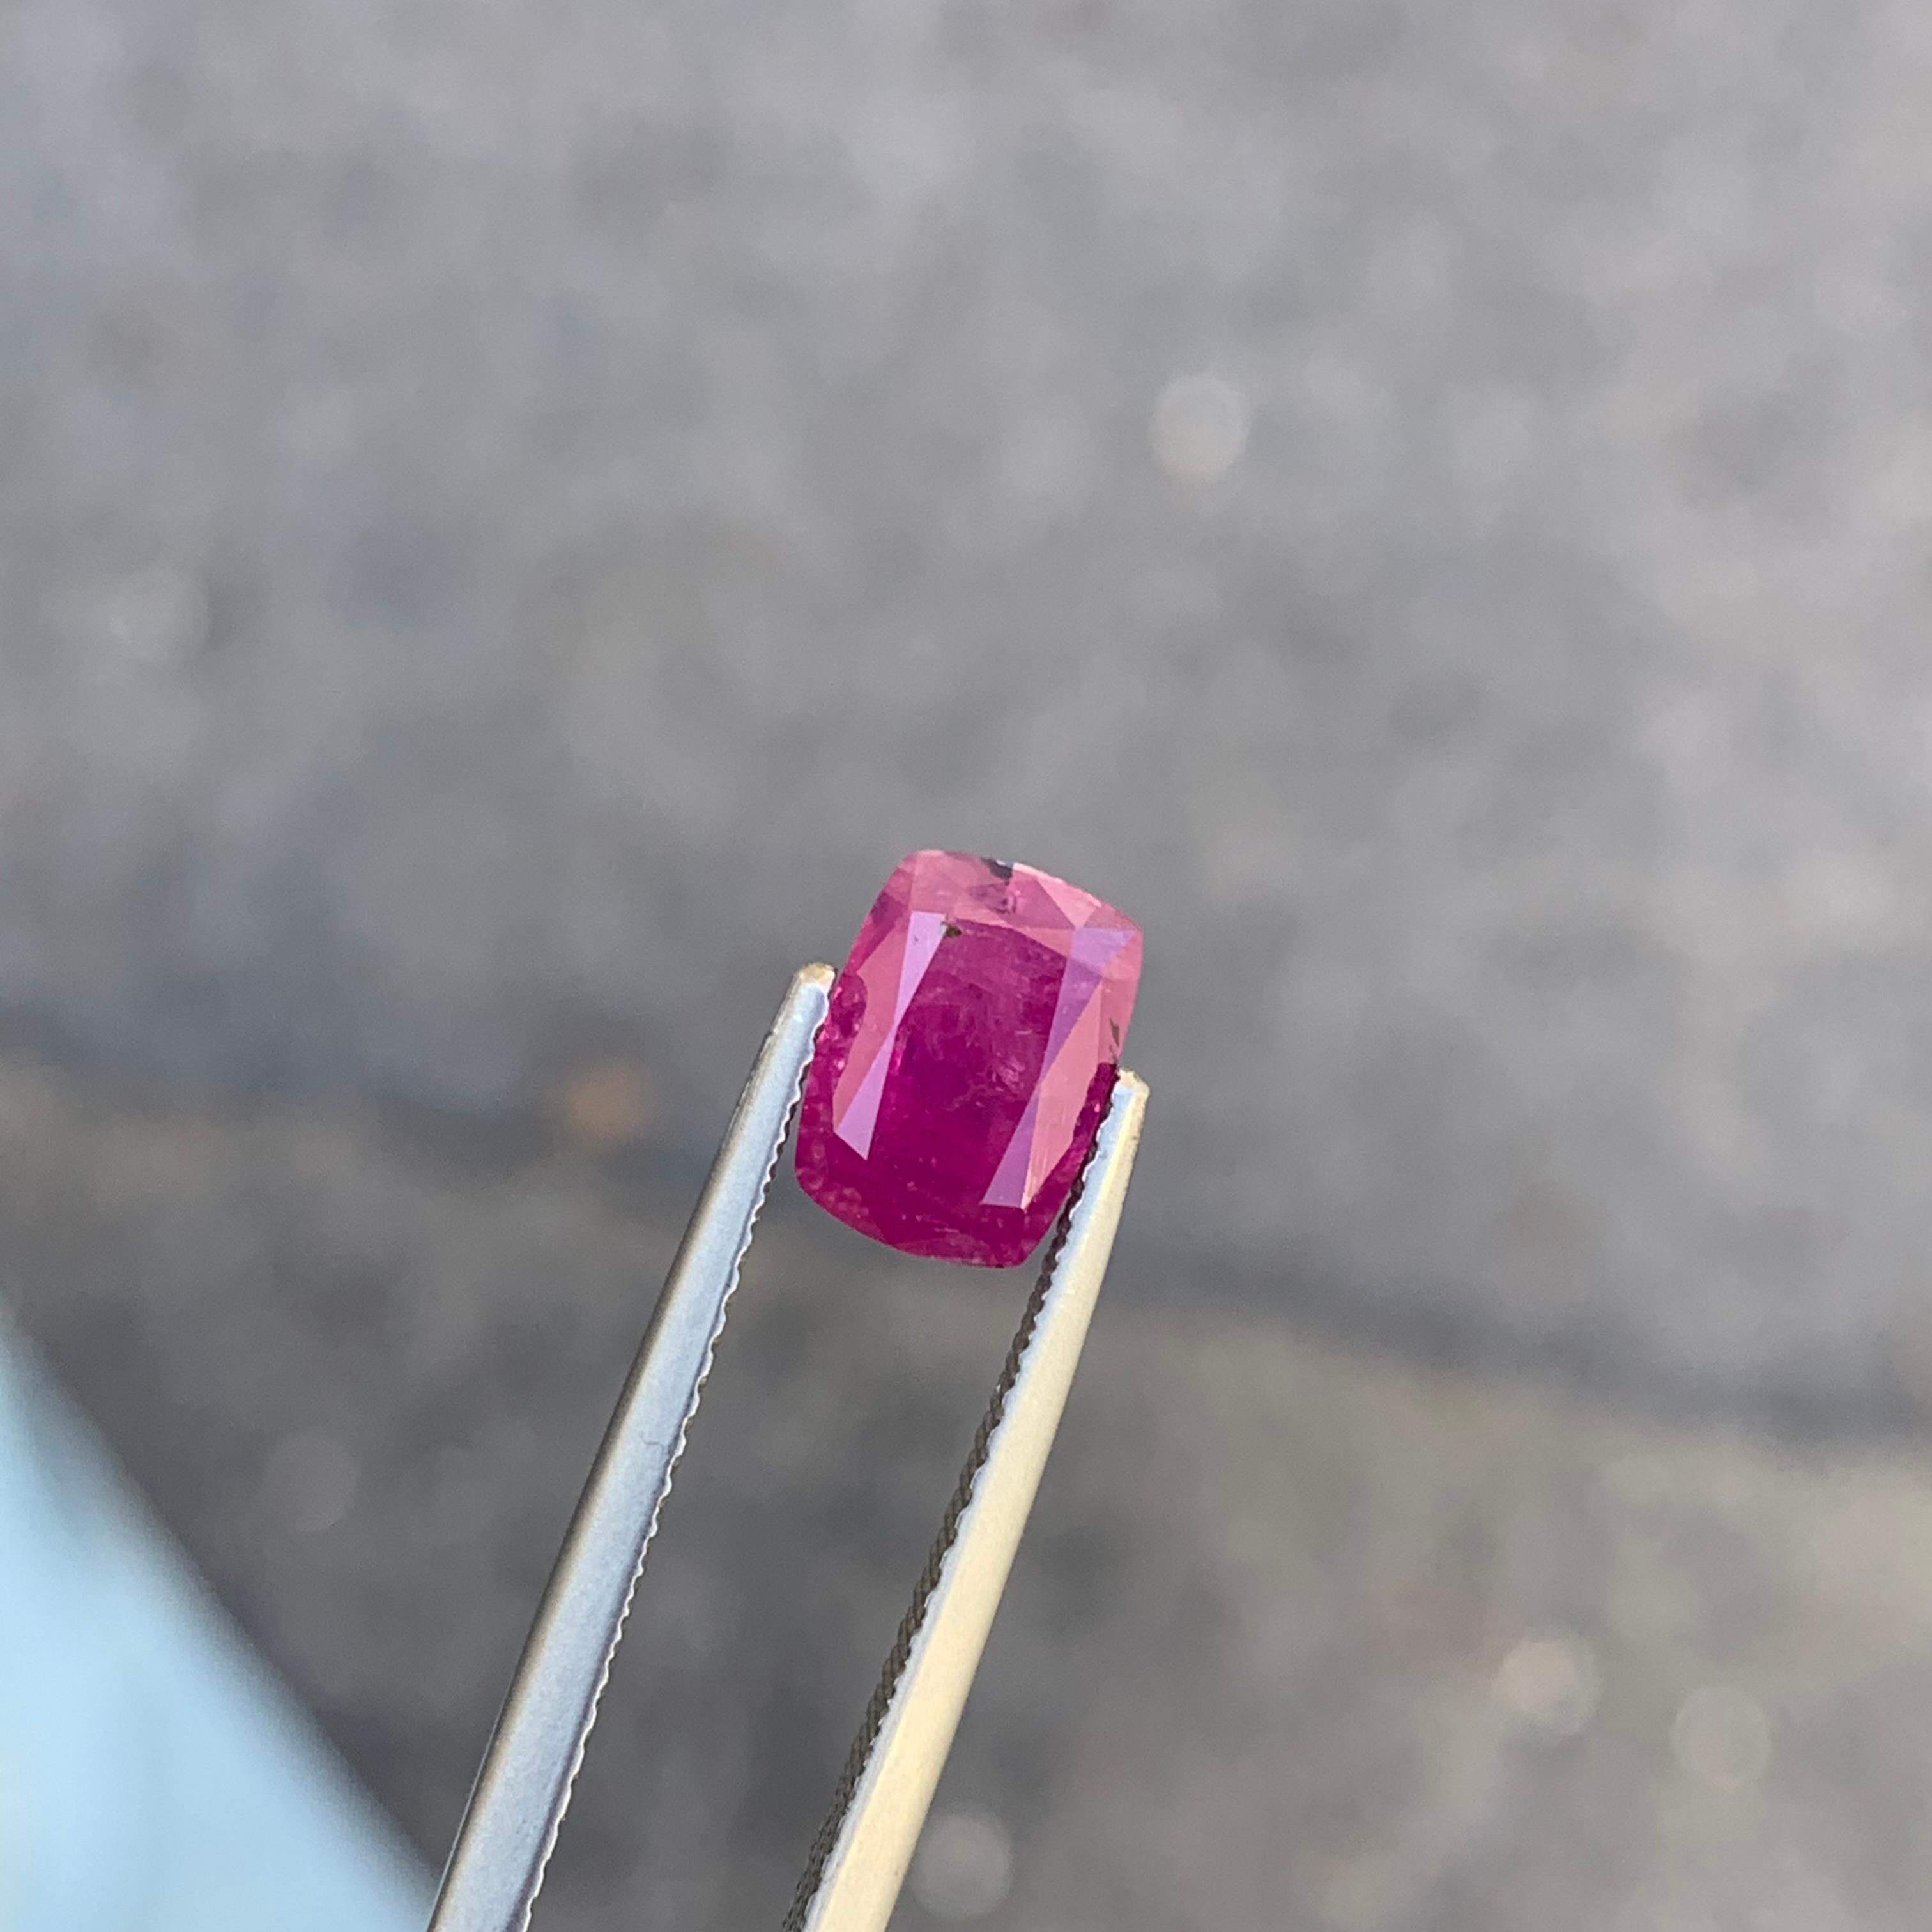 Certified 1.65 Carat Natural Loose Ruby Corundum From Afghan Mine Ring Gemstone For Sale 6